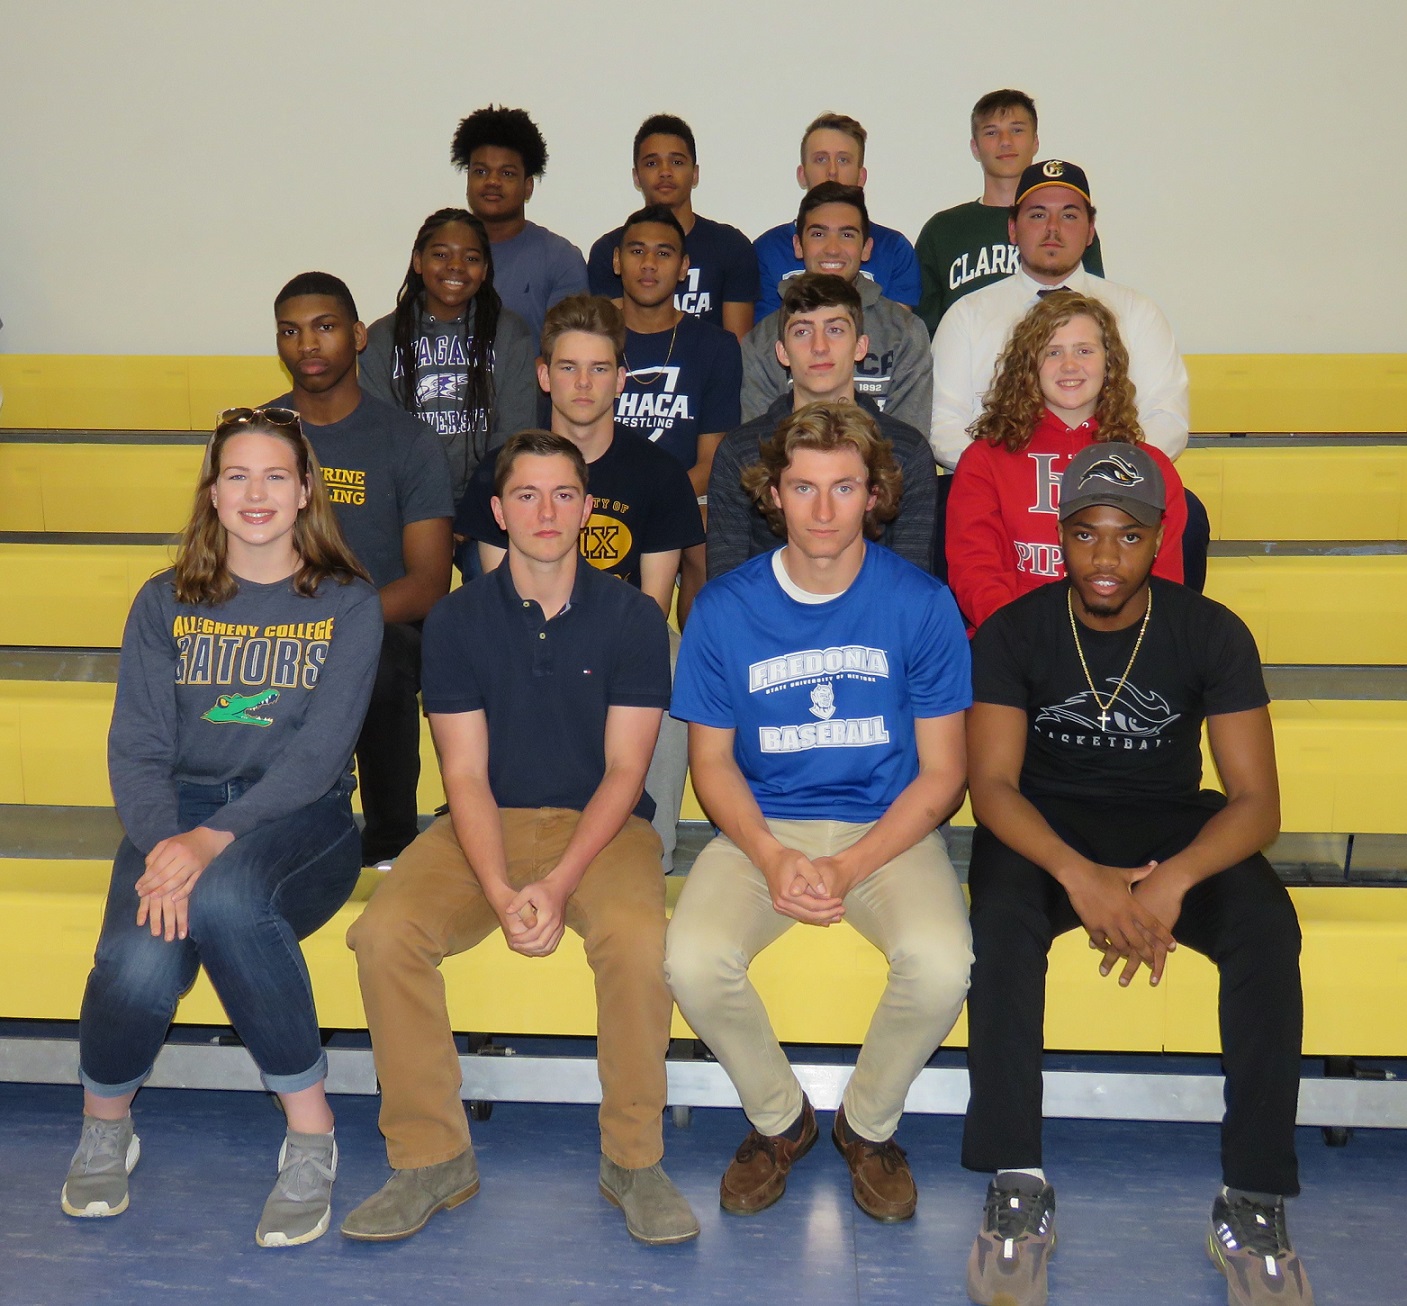 Front row, from left, Margaret Bilquin, Michael Cirrito, Dominic Geracitano Jr. and Josiah Harris. 
Second row, from left, Maurice Jackson, Treavor Janese, Josh McCoy and Bennett Nigro. 
Third row, from left, Avianna Peterson, DeAndre Prum, Robert Pucci and Jacob Robertson.
Back row, from left, Jourdan Scott, Michael Snowden, Michael Uhrich Jr. and Joseph White. (Photos by David Yarger)